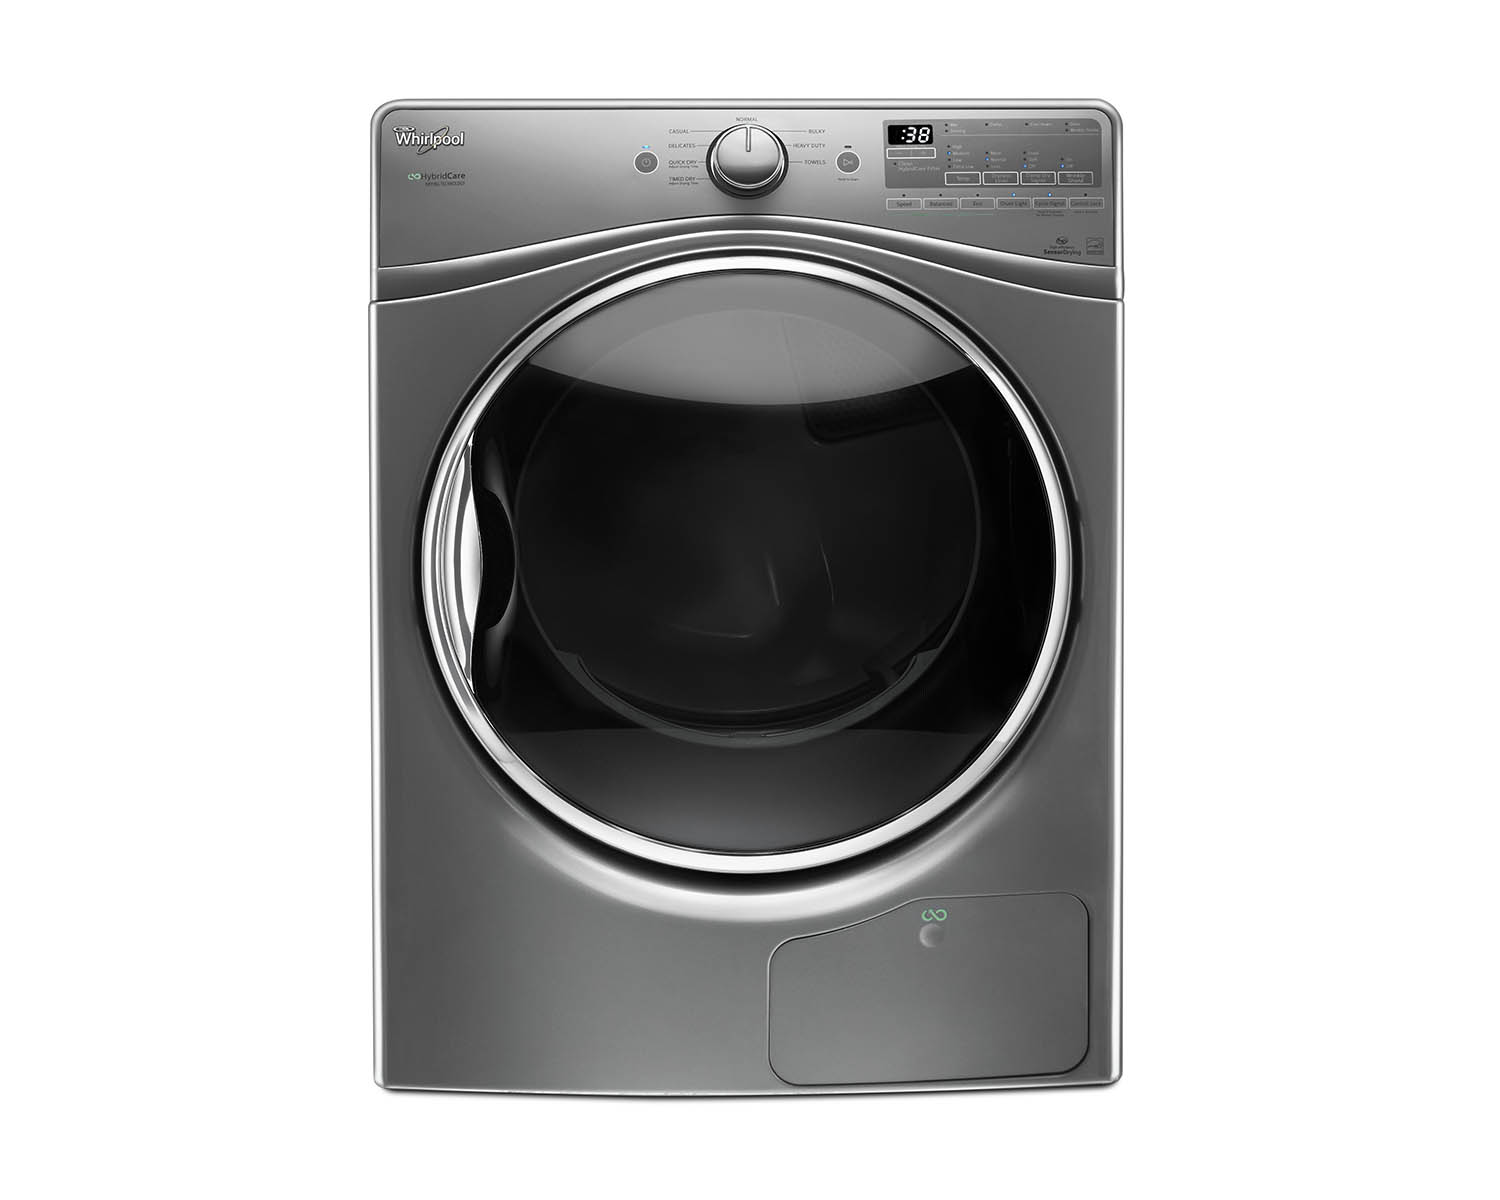 How To Fix The Error Code F29 For Whirlpool Dryer